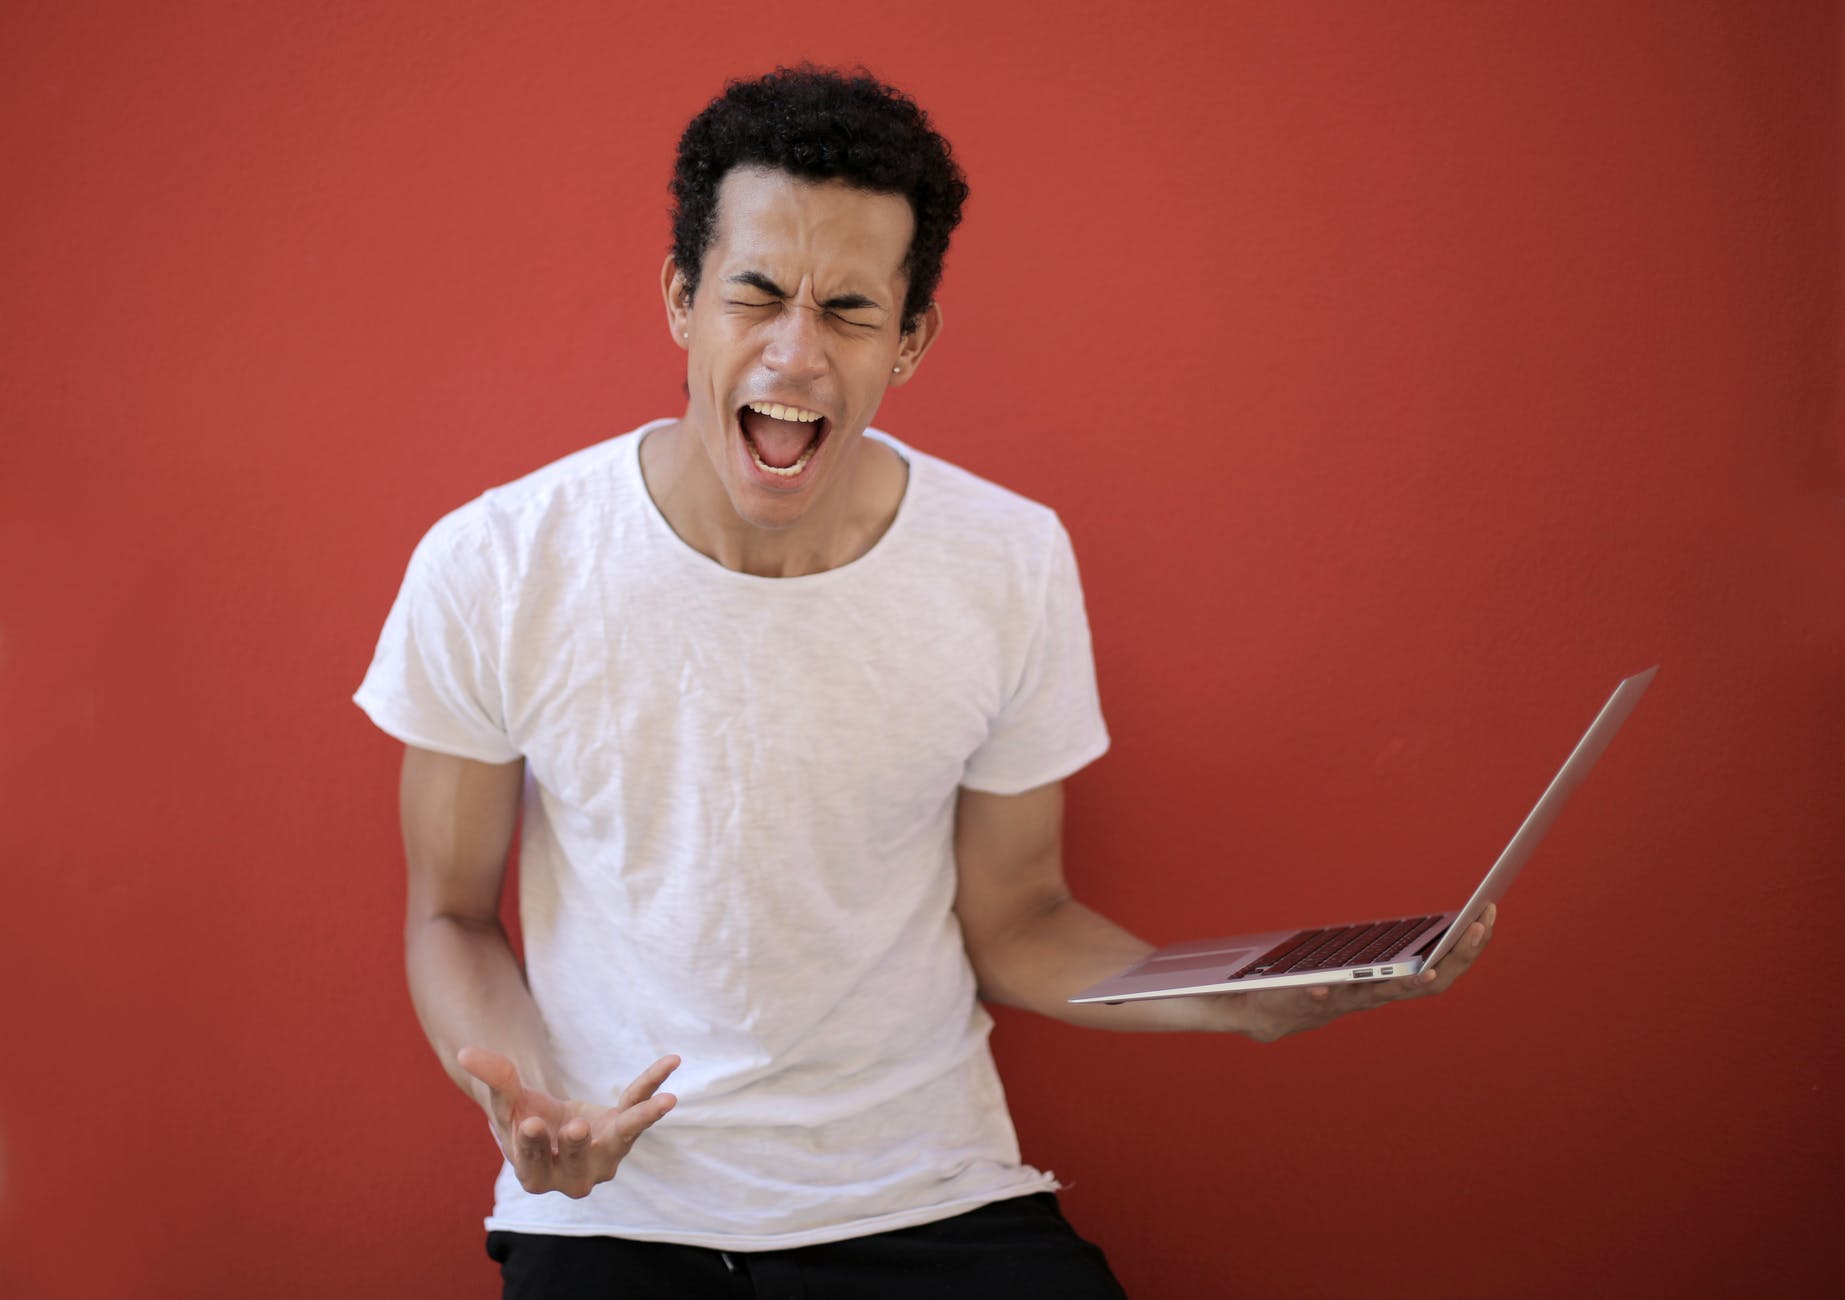 young ethnic male with laptop screaming